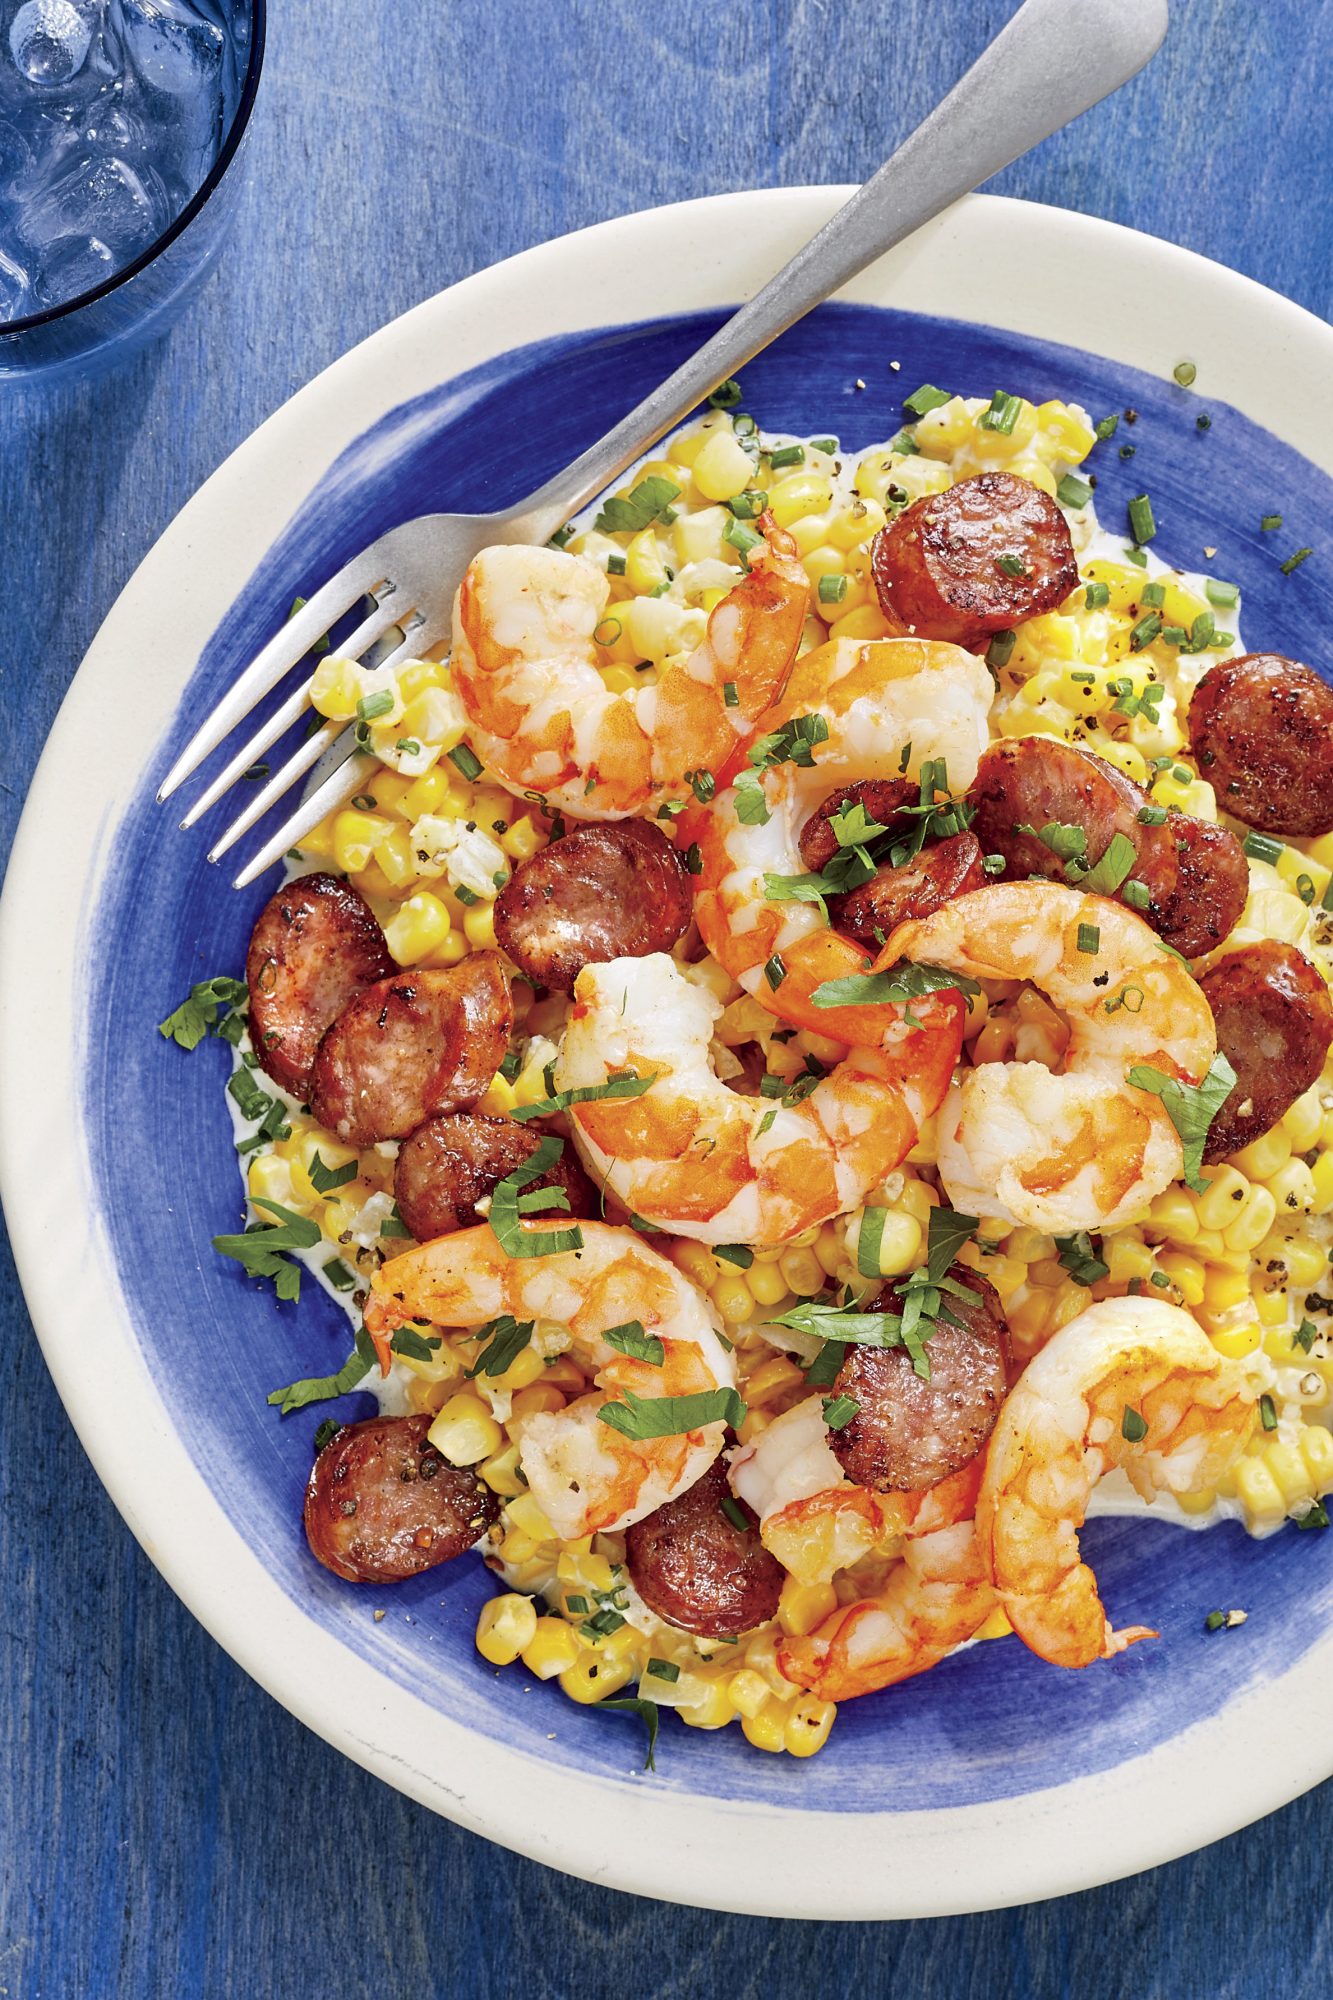 Skillet Corn with Shrimp and Sausage